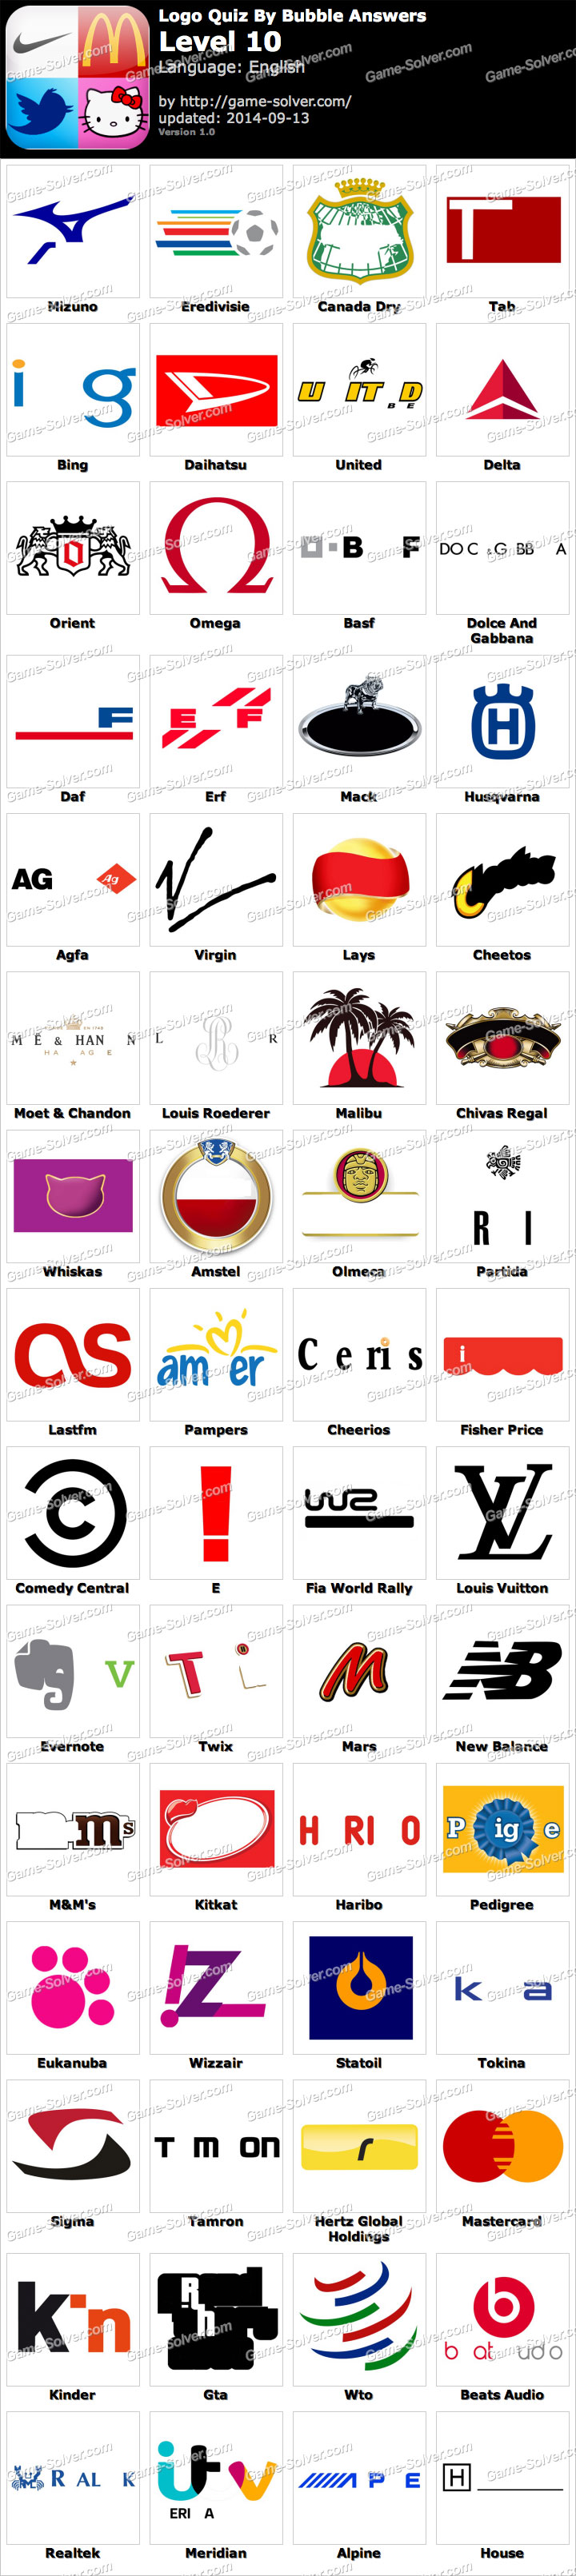 logo quiz answers level 11 android version